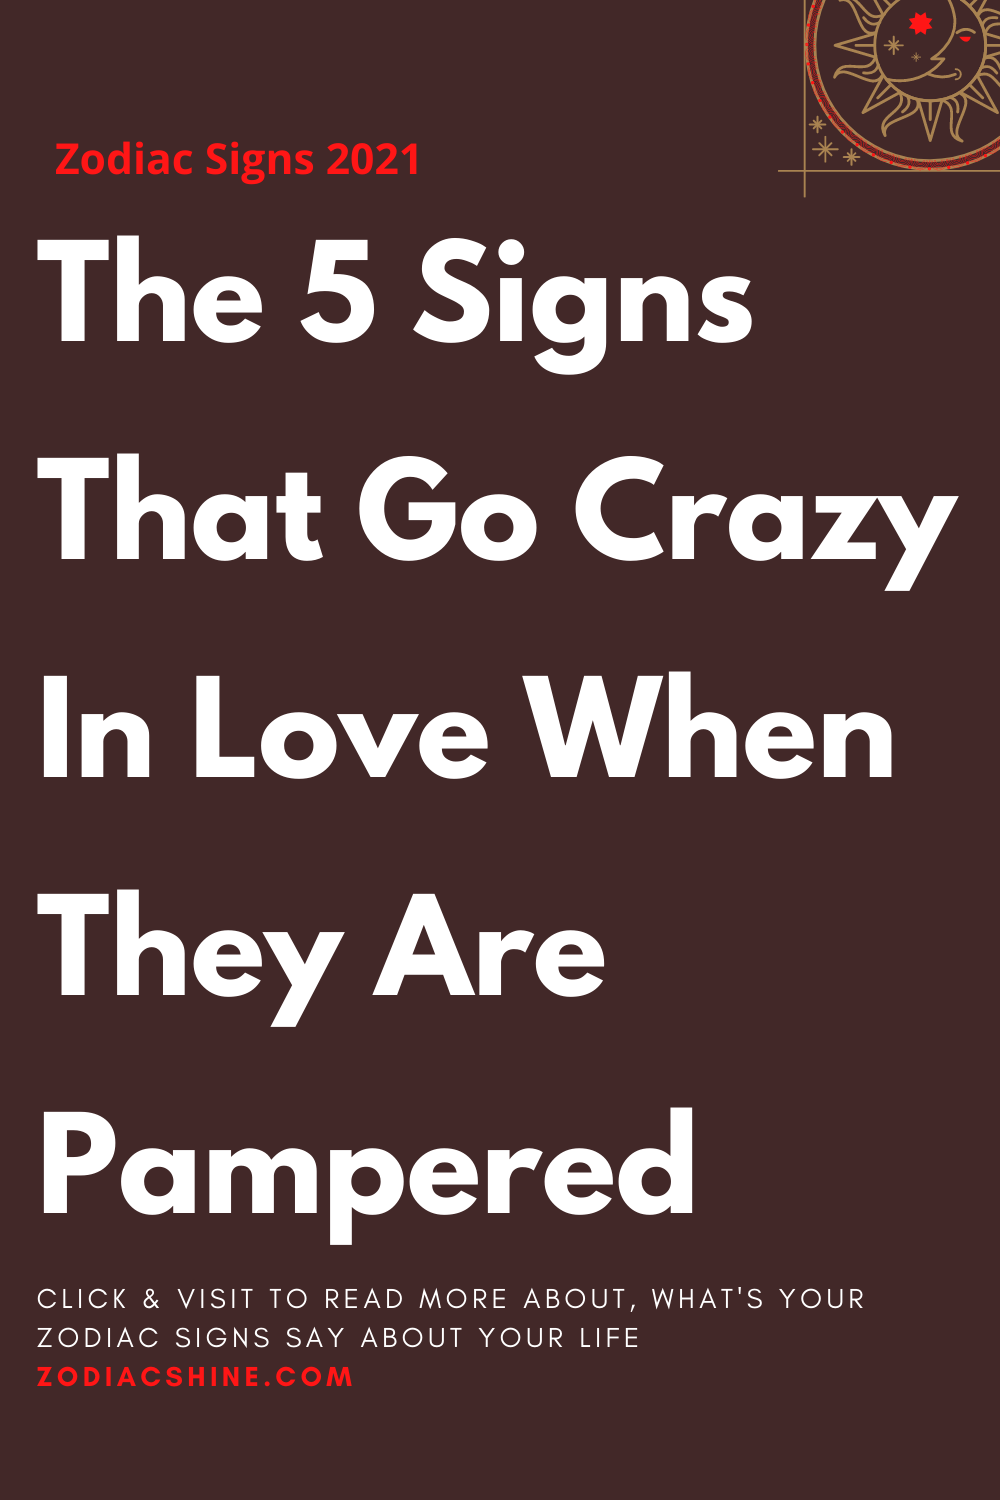 The 5 Signs That Go Crazy In Love When They Are Pampered